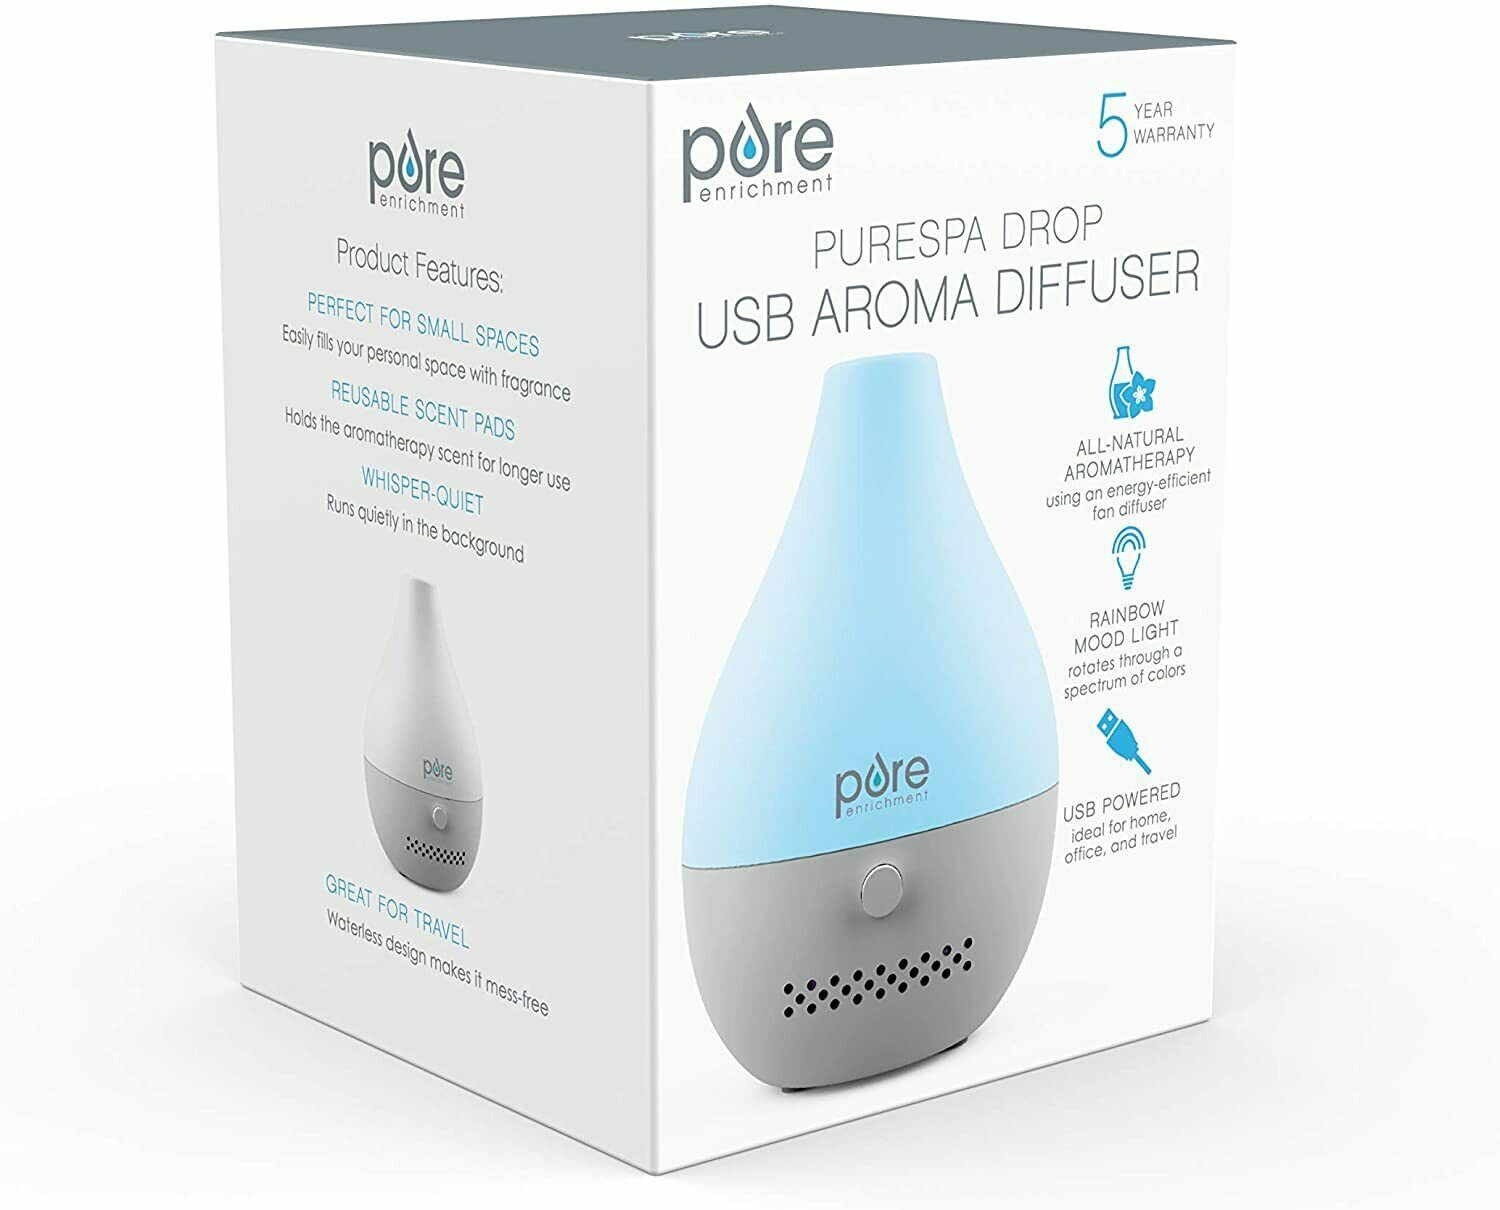 Usb aroma diffuser with color-changing mood light, suitable for small spaces, featuring whisper-quiet operation and marketed as an all-natural air freshener.